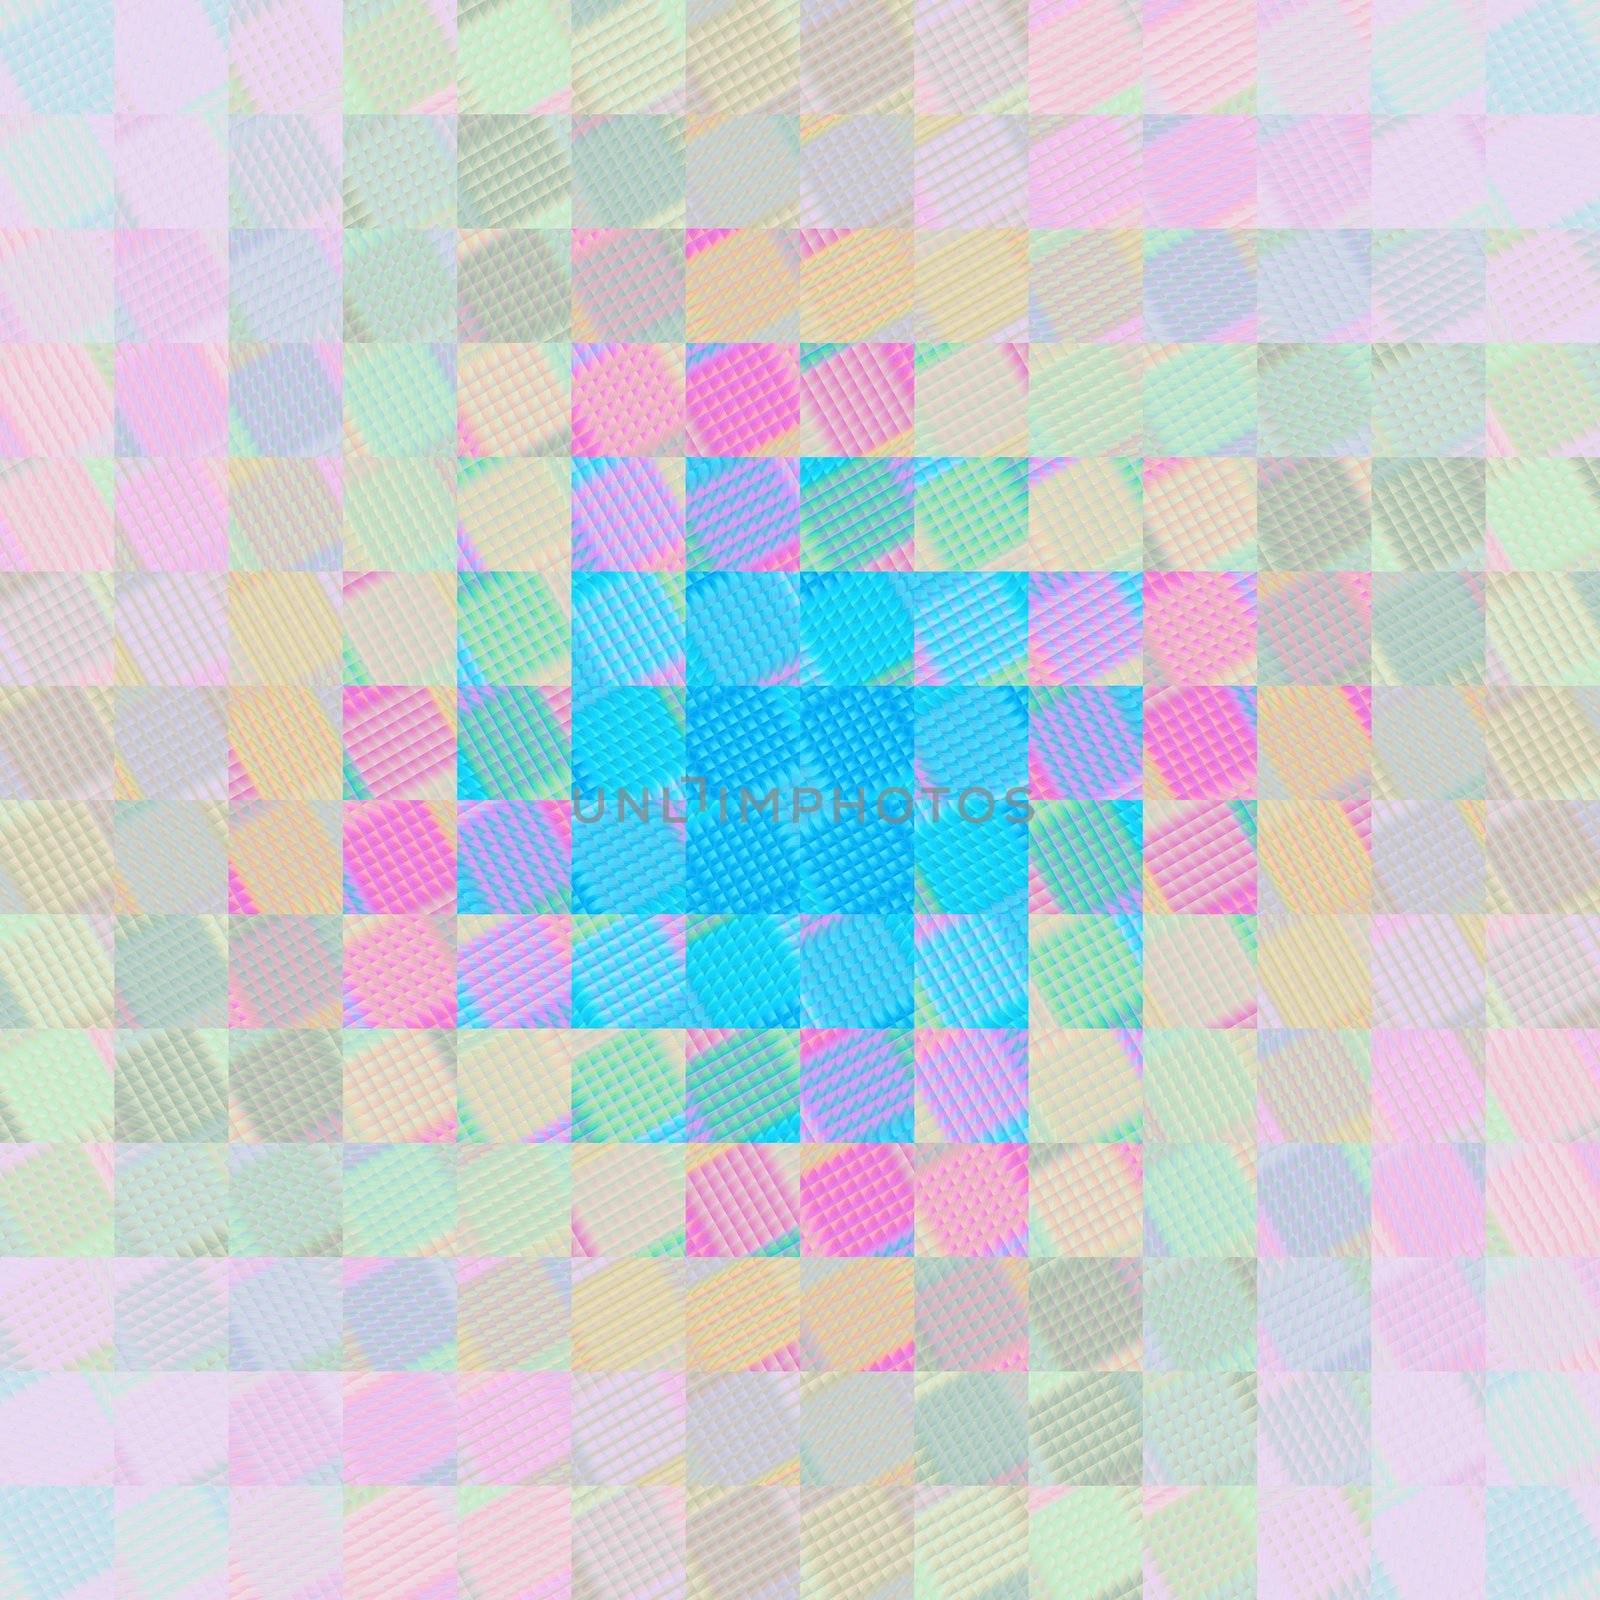 texture of colorful squares in pastel colors